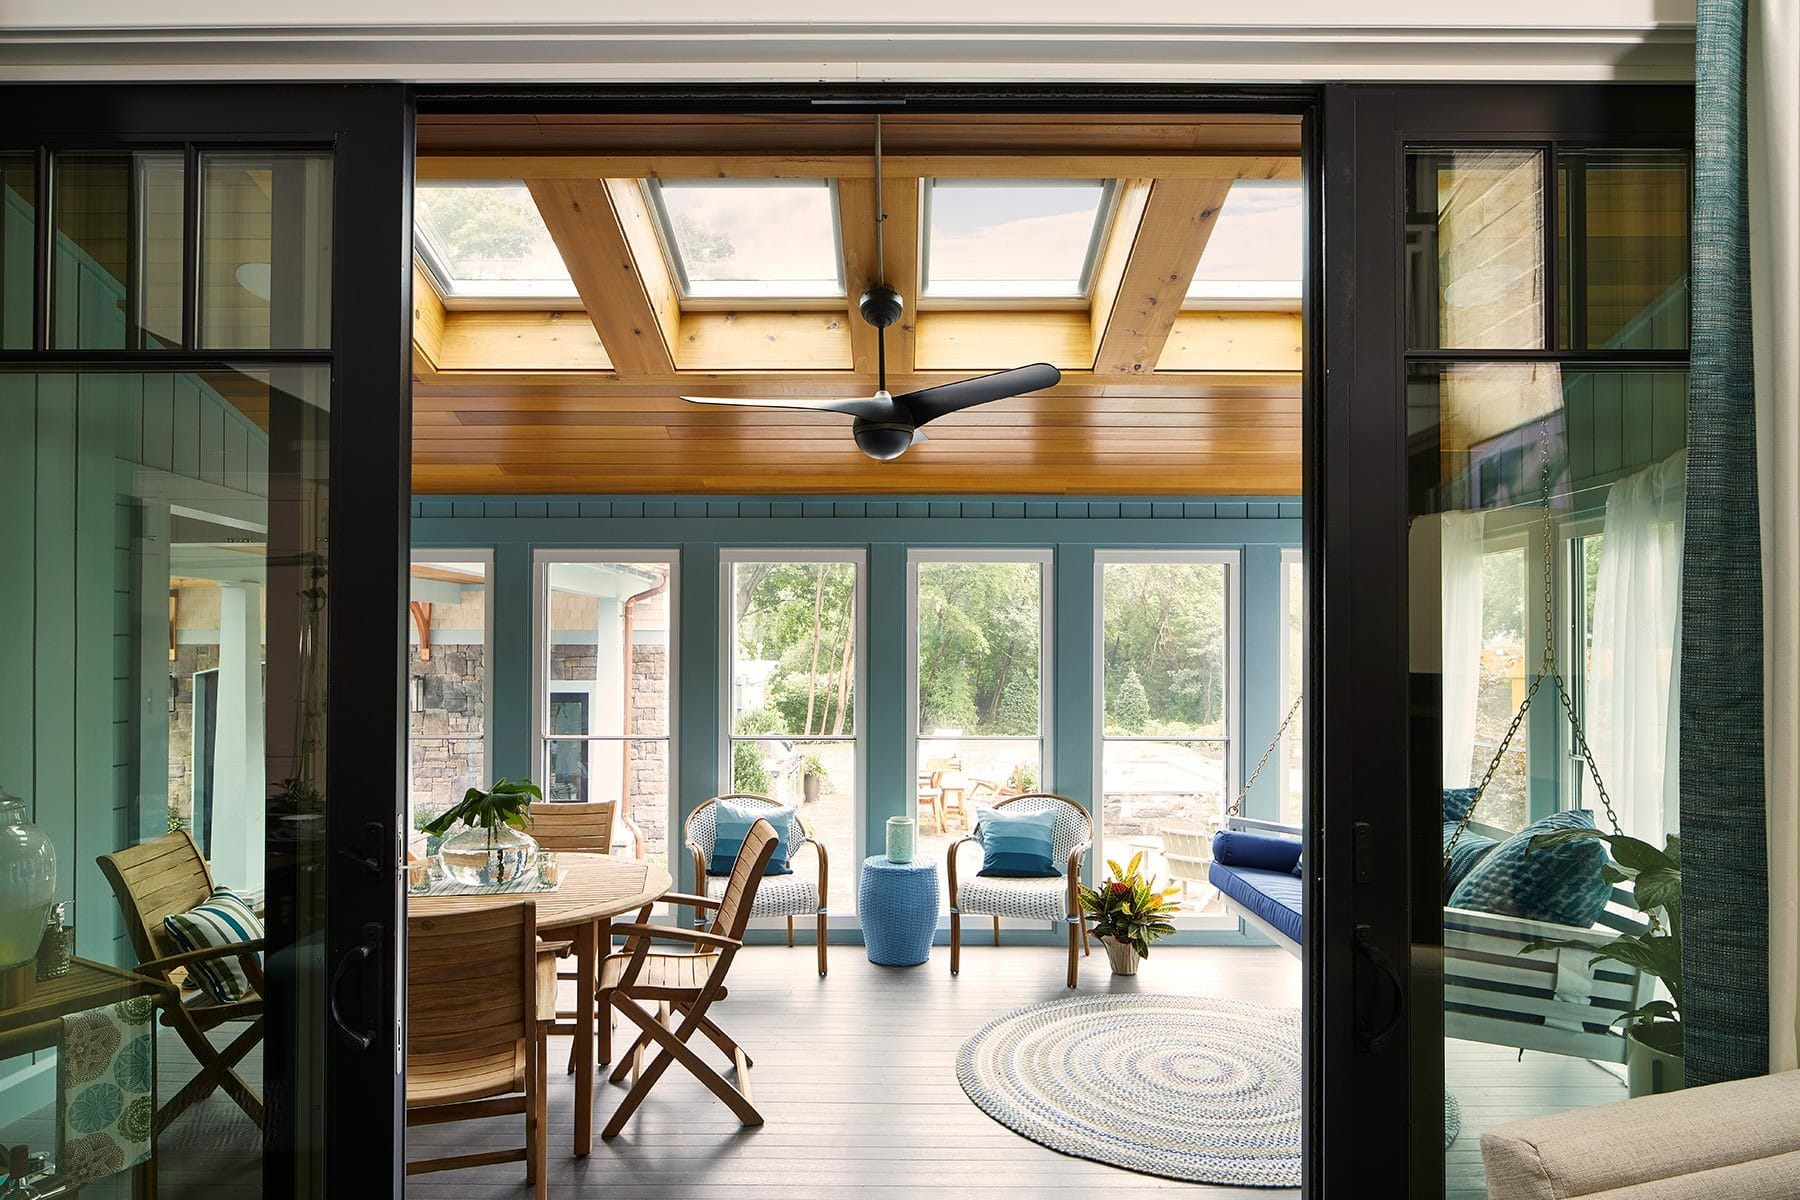 Blue sunroom with four skylights on a wooden ceiling